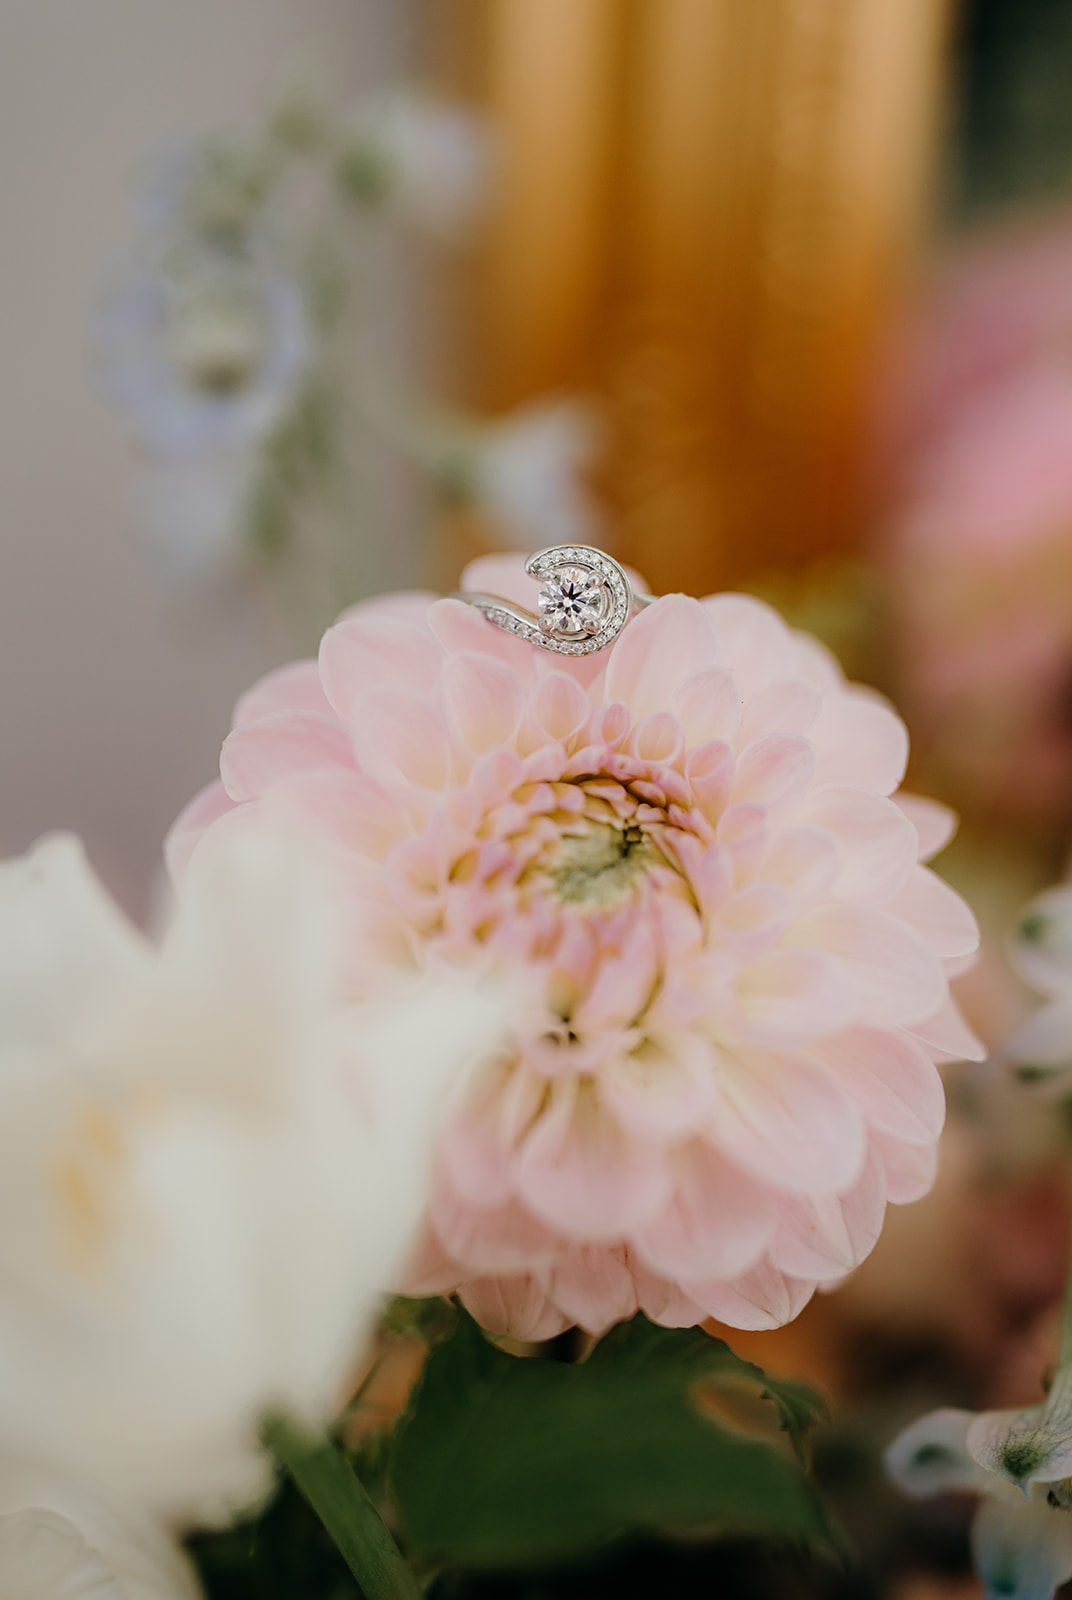 Close up of the engagement ring on the flowers